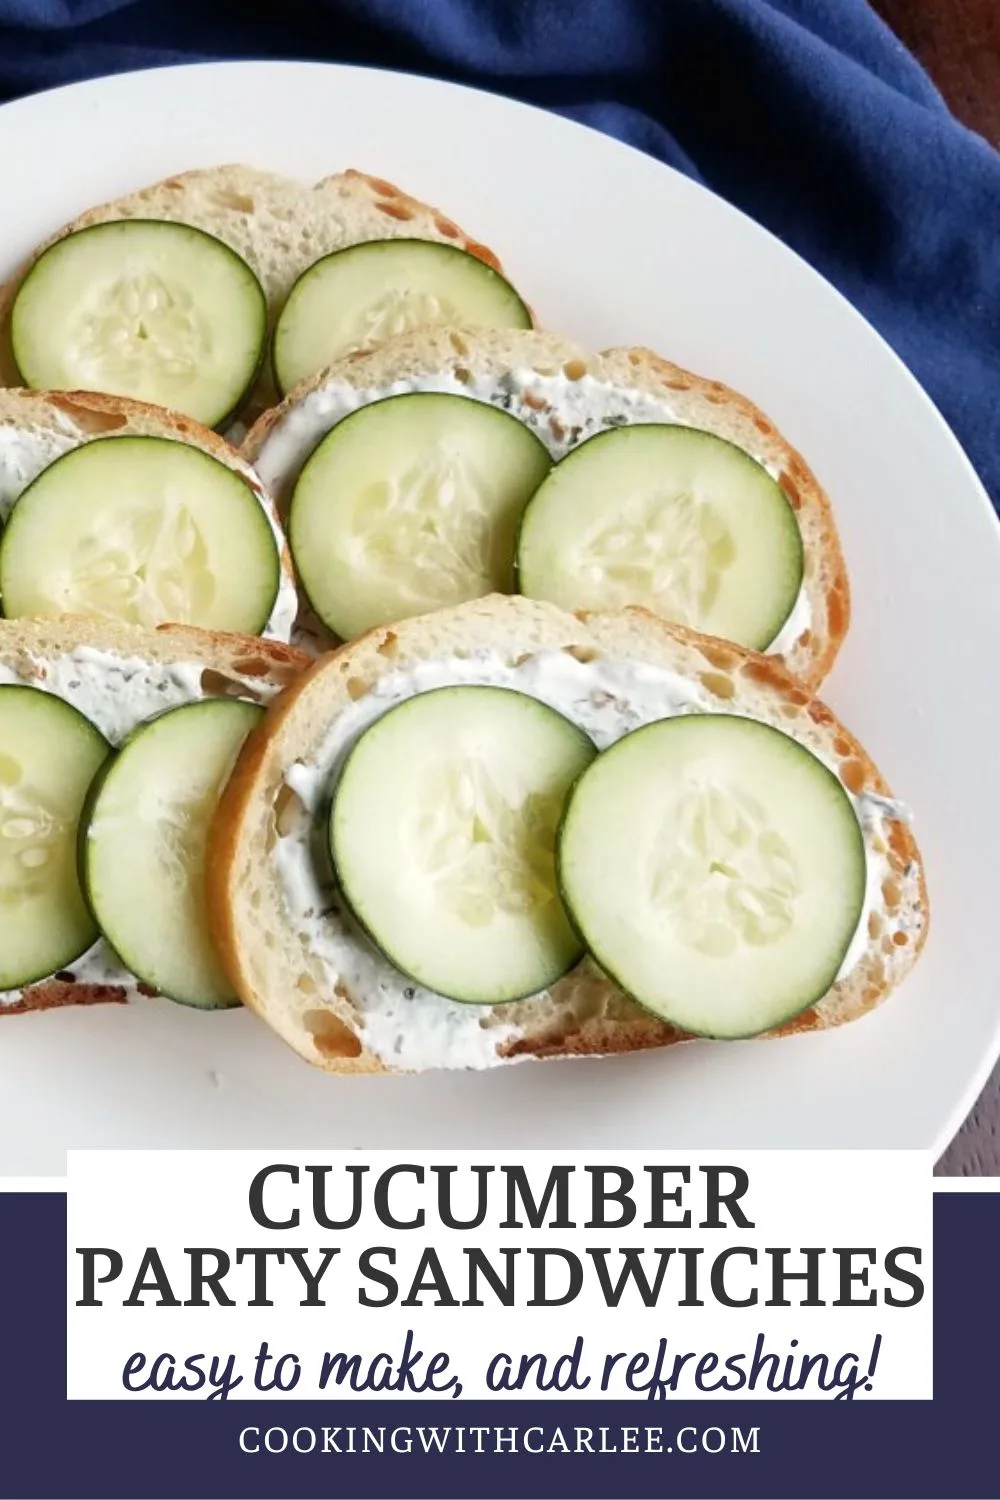 Spring into summer with these fresh and simple cucumber ranch bread bites, perfect for your next gathering! Quick and easy to make-ahead, they're the perfect appetizer for any occasion.